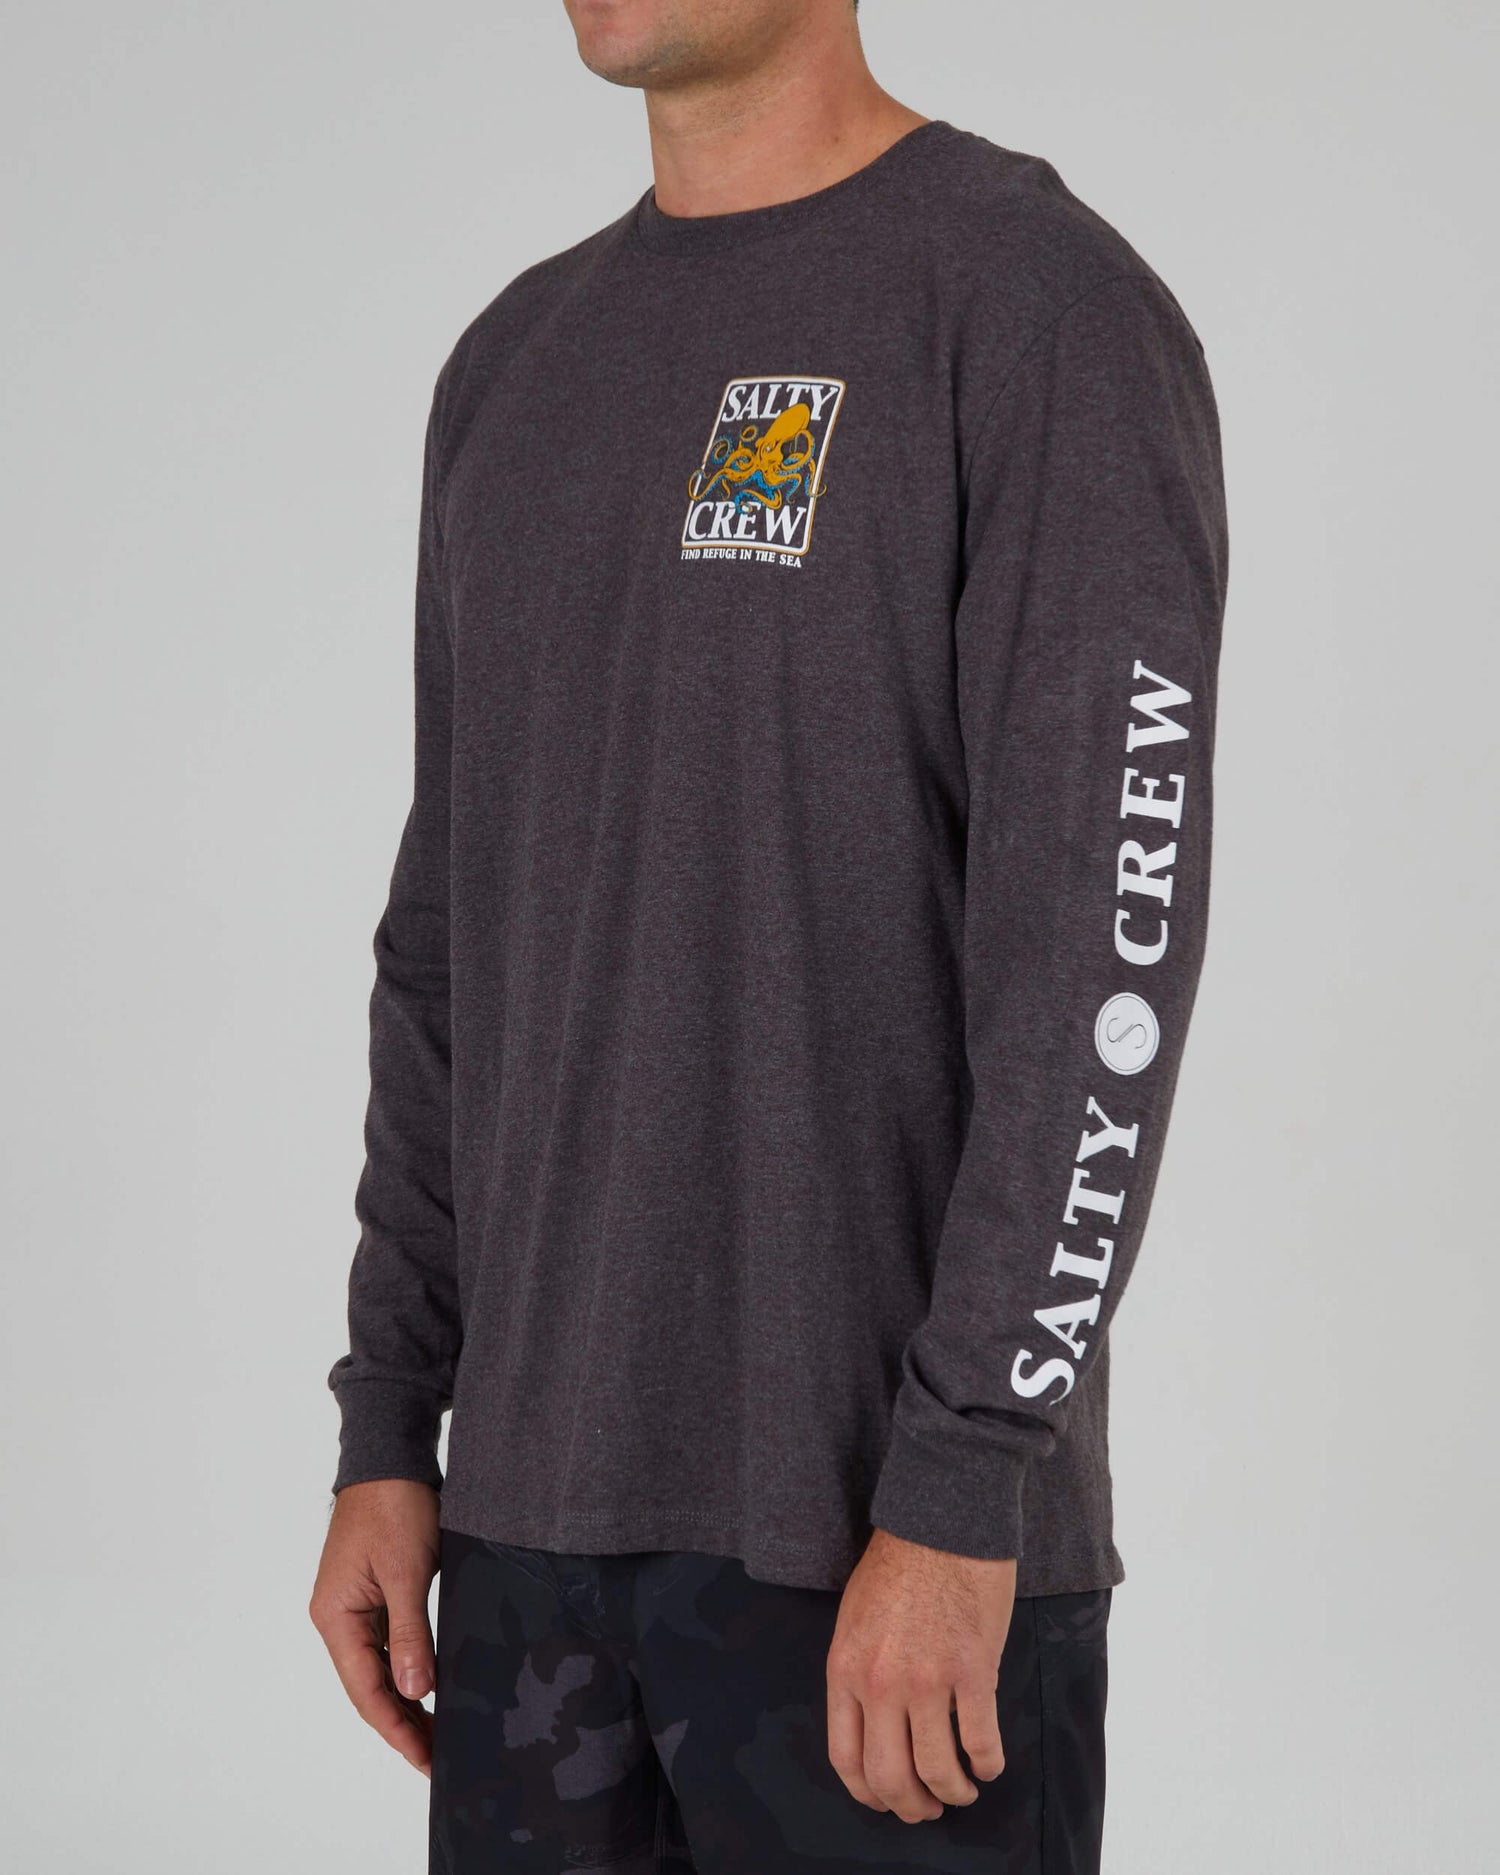 Salty crew T-SHIRTS L/S Ink Slinger Standard L/S Tee - Charcoal Heather in CHARCOAL HEATHER